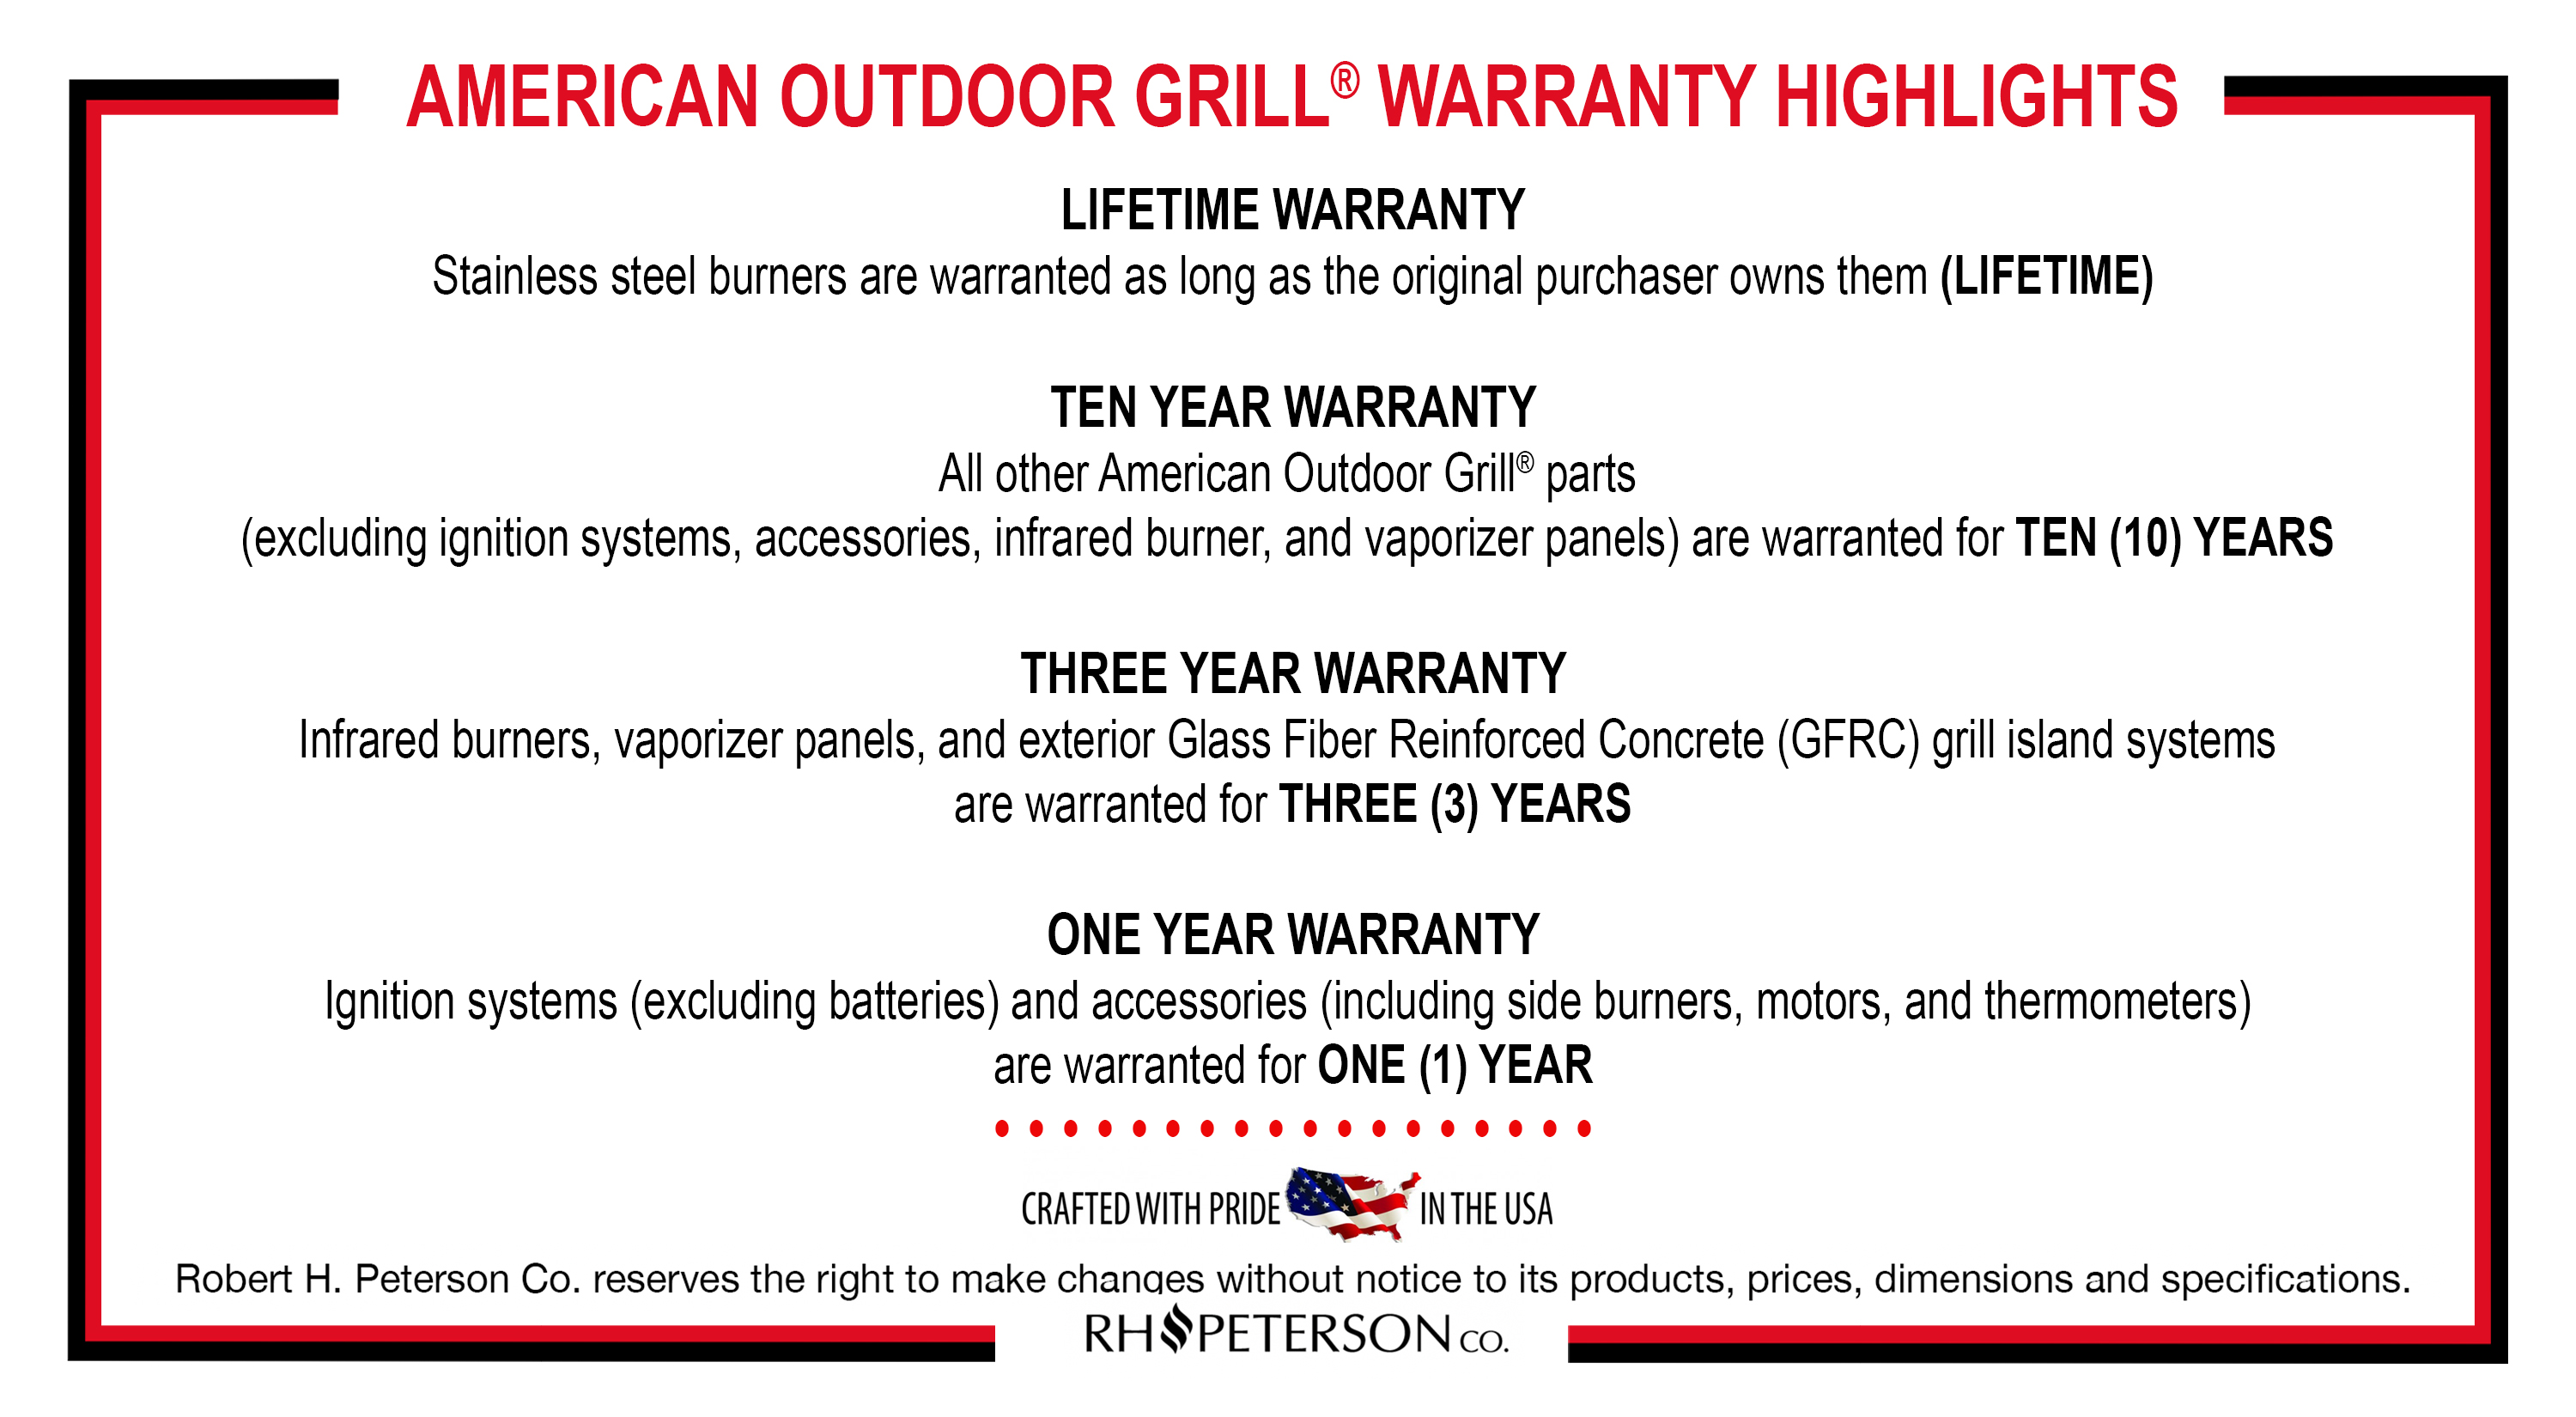 American Outdoor Grill TSeries Barbecue Grill 24NPT00SP